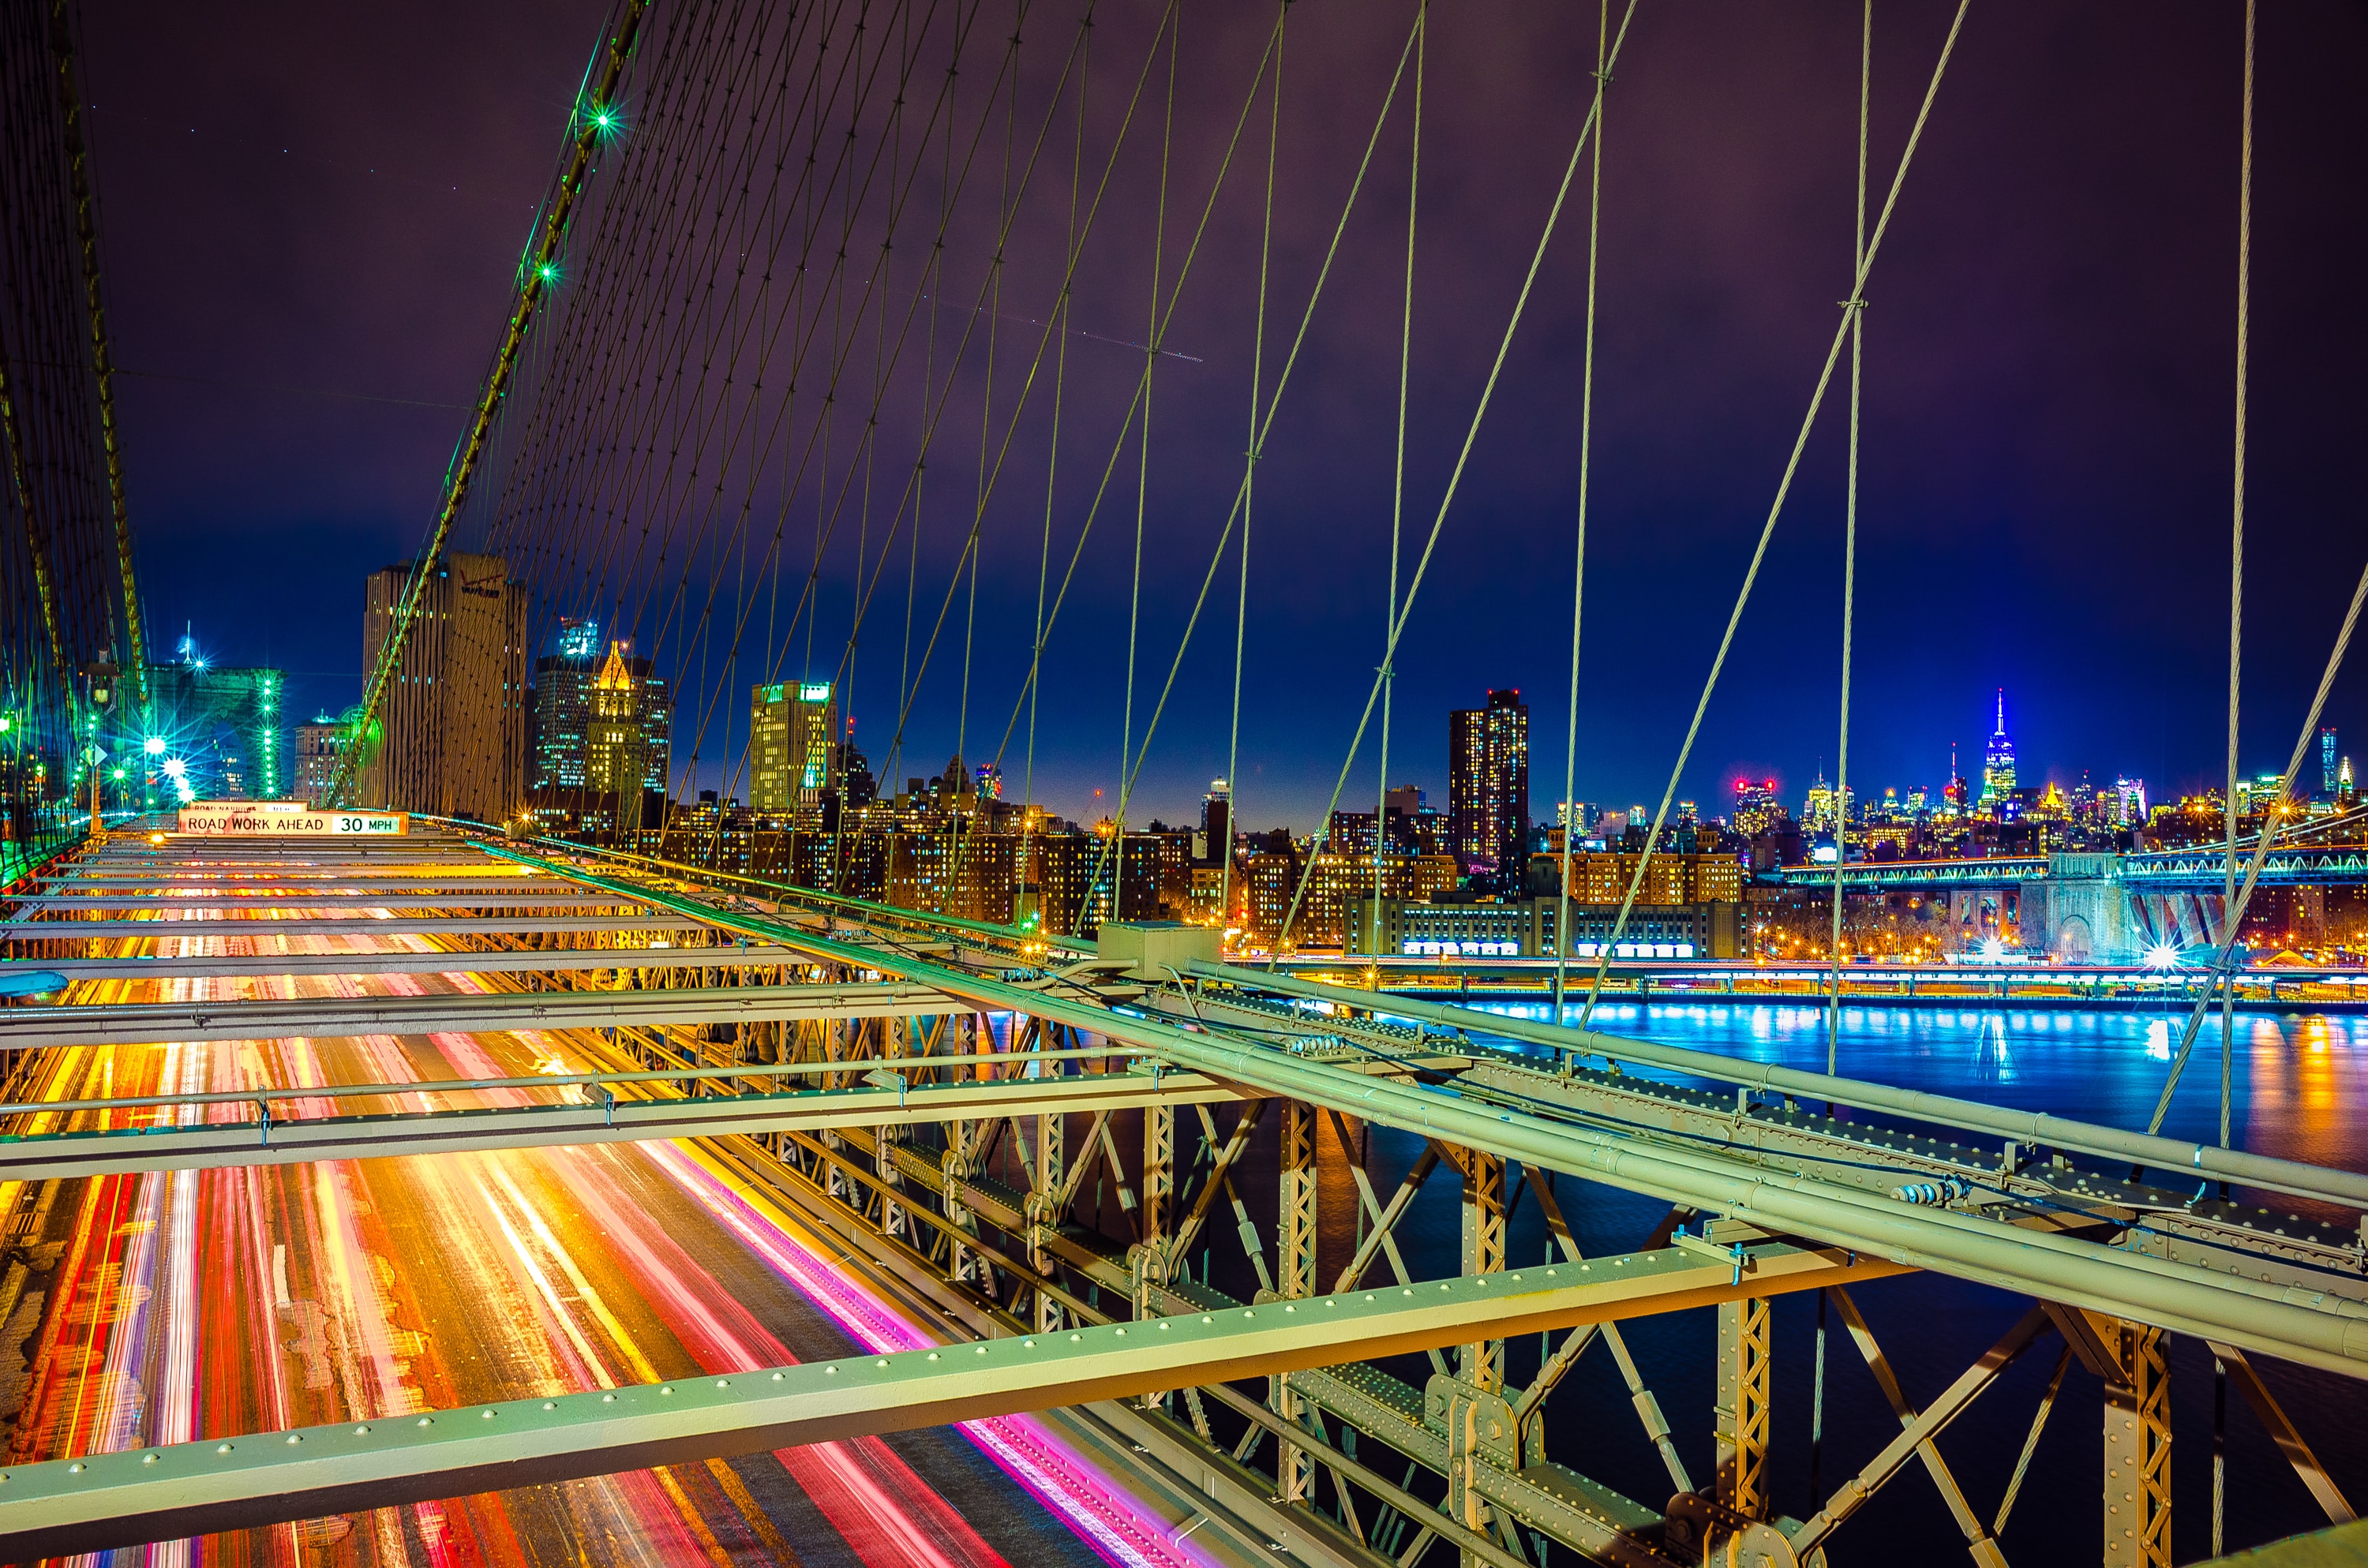 Brooklyn Bridge at night with city lights showing